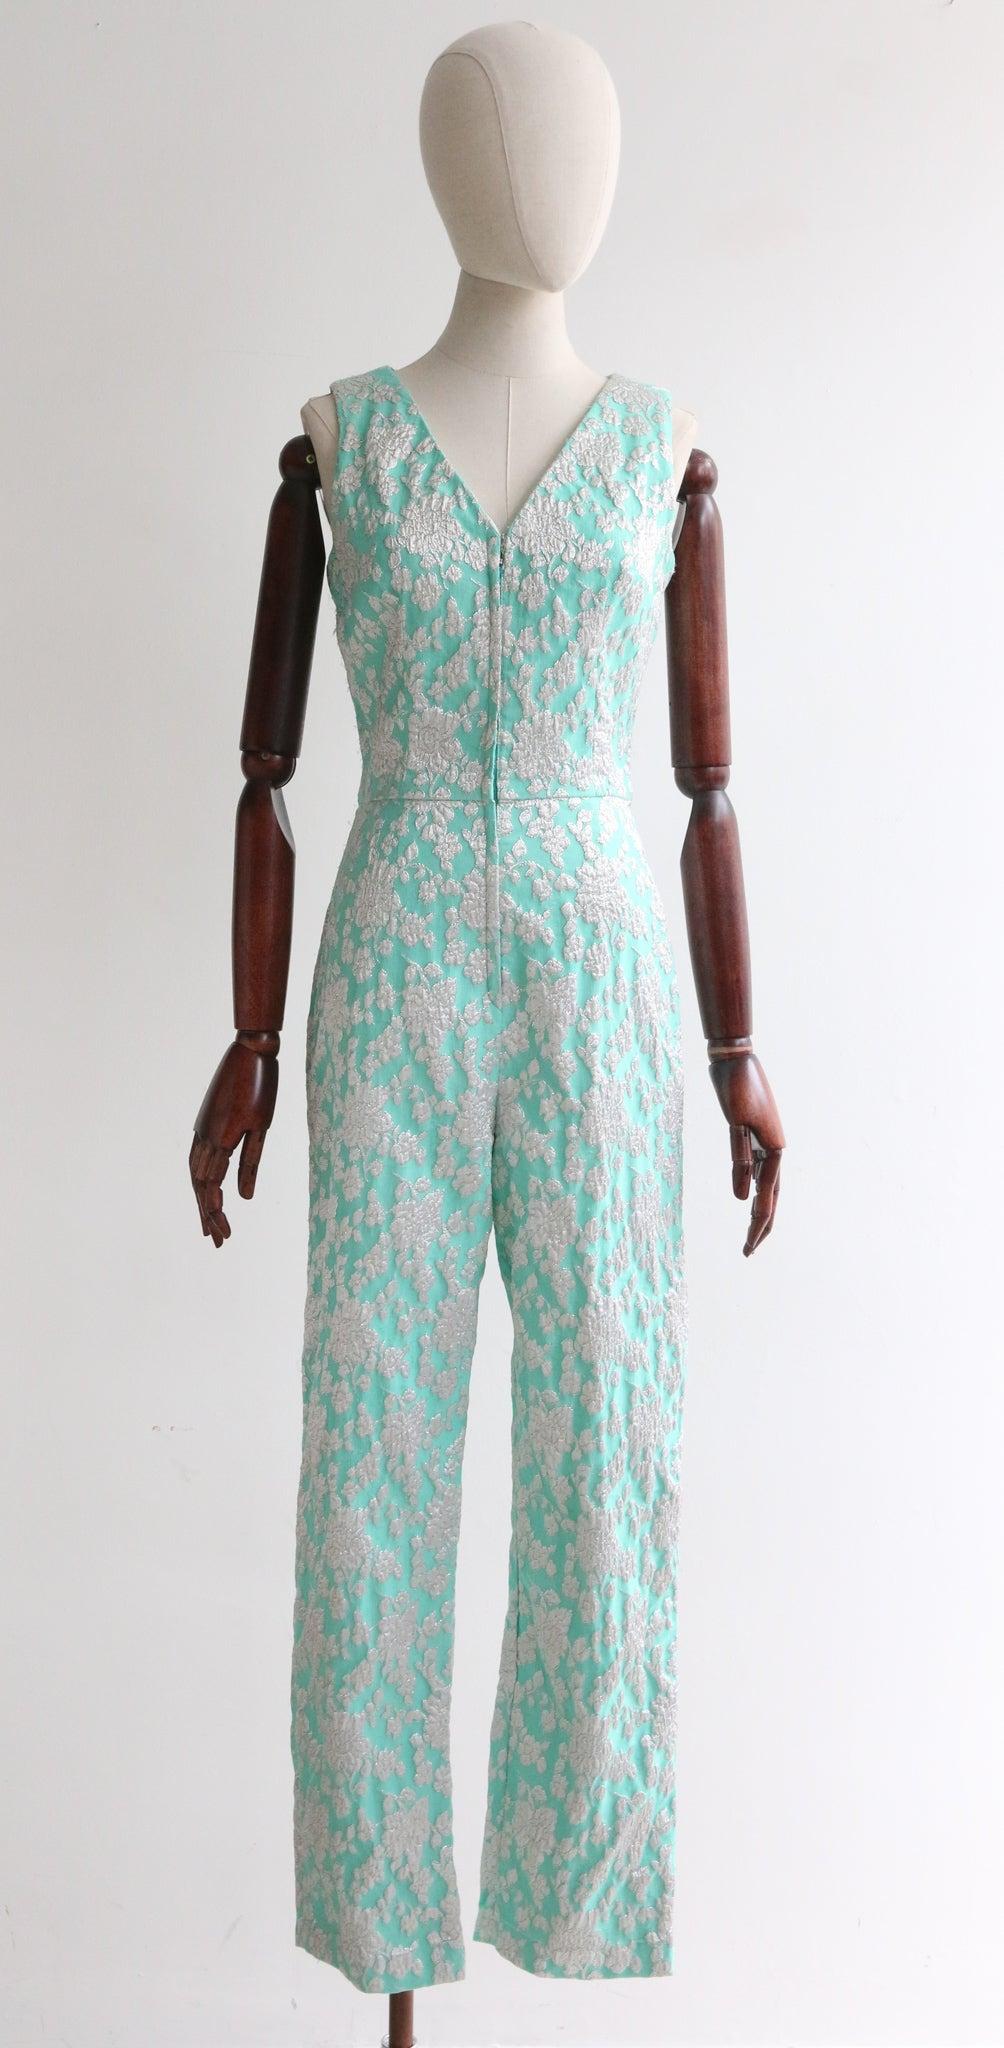 An iconic piece, this original 1960's jumpsuit and matching coat in an ice blue brocade with silver floral lurex accents, is the perfect statement piece for your vintage wardrobe. 

The V shaped neckline is framed by wide shoulder straps and a